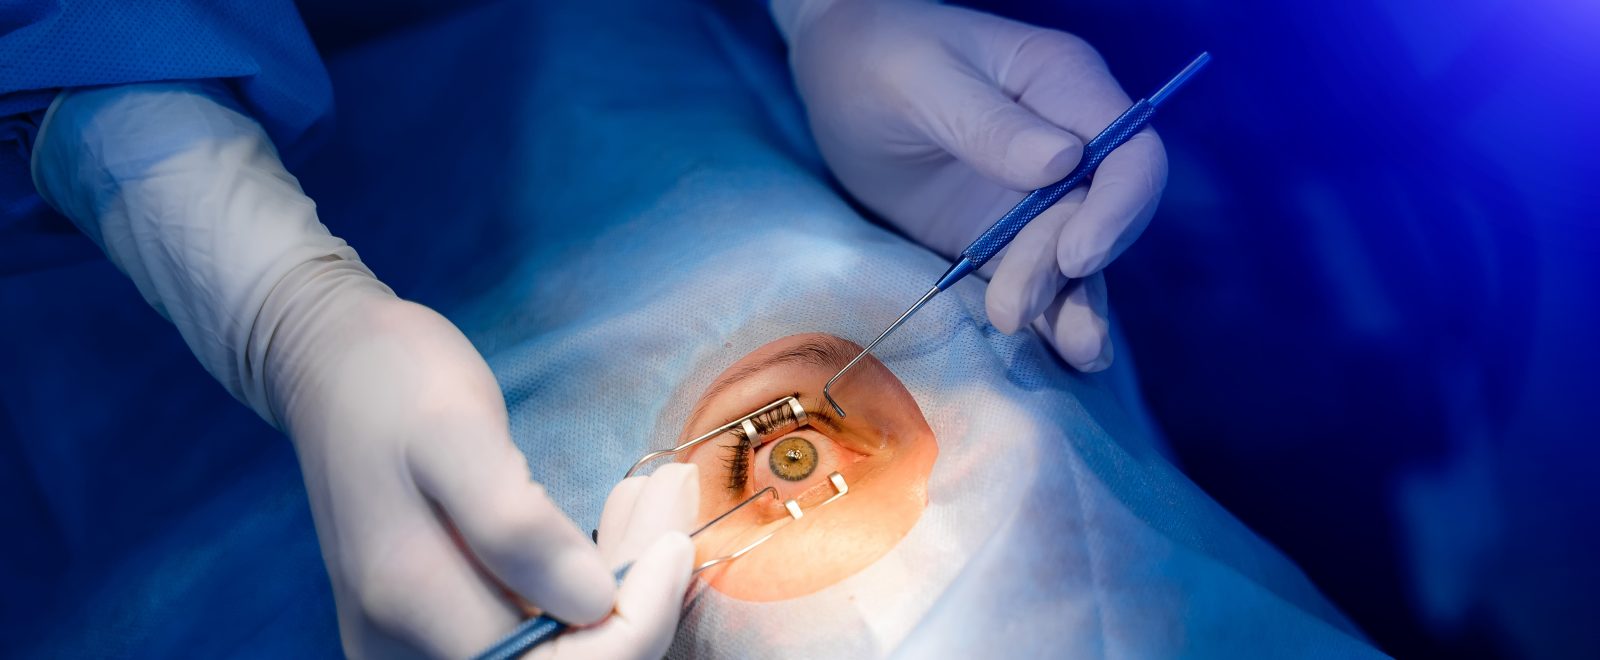 Ophthalmic surgery